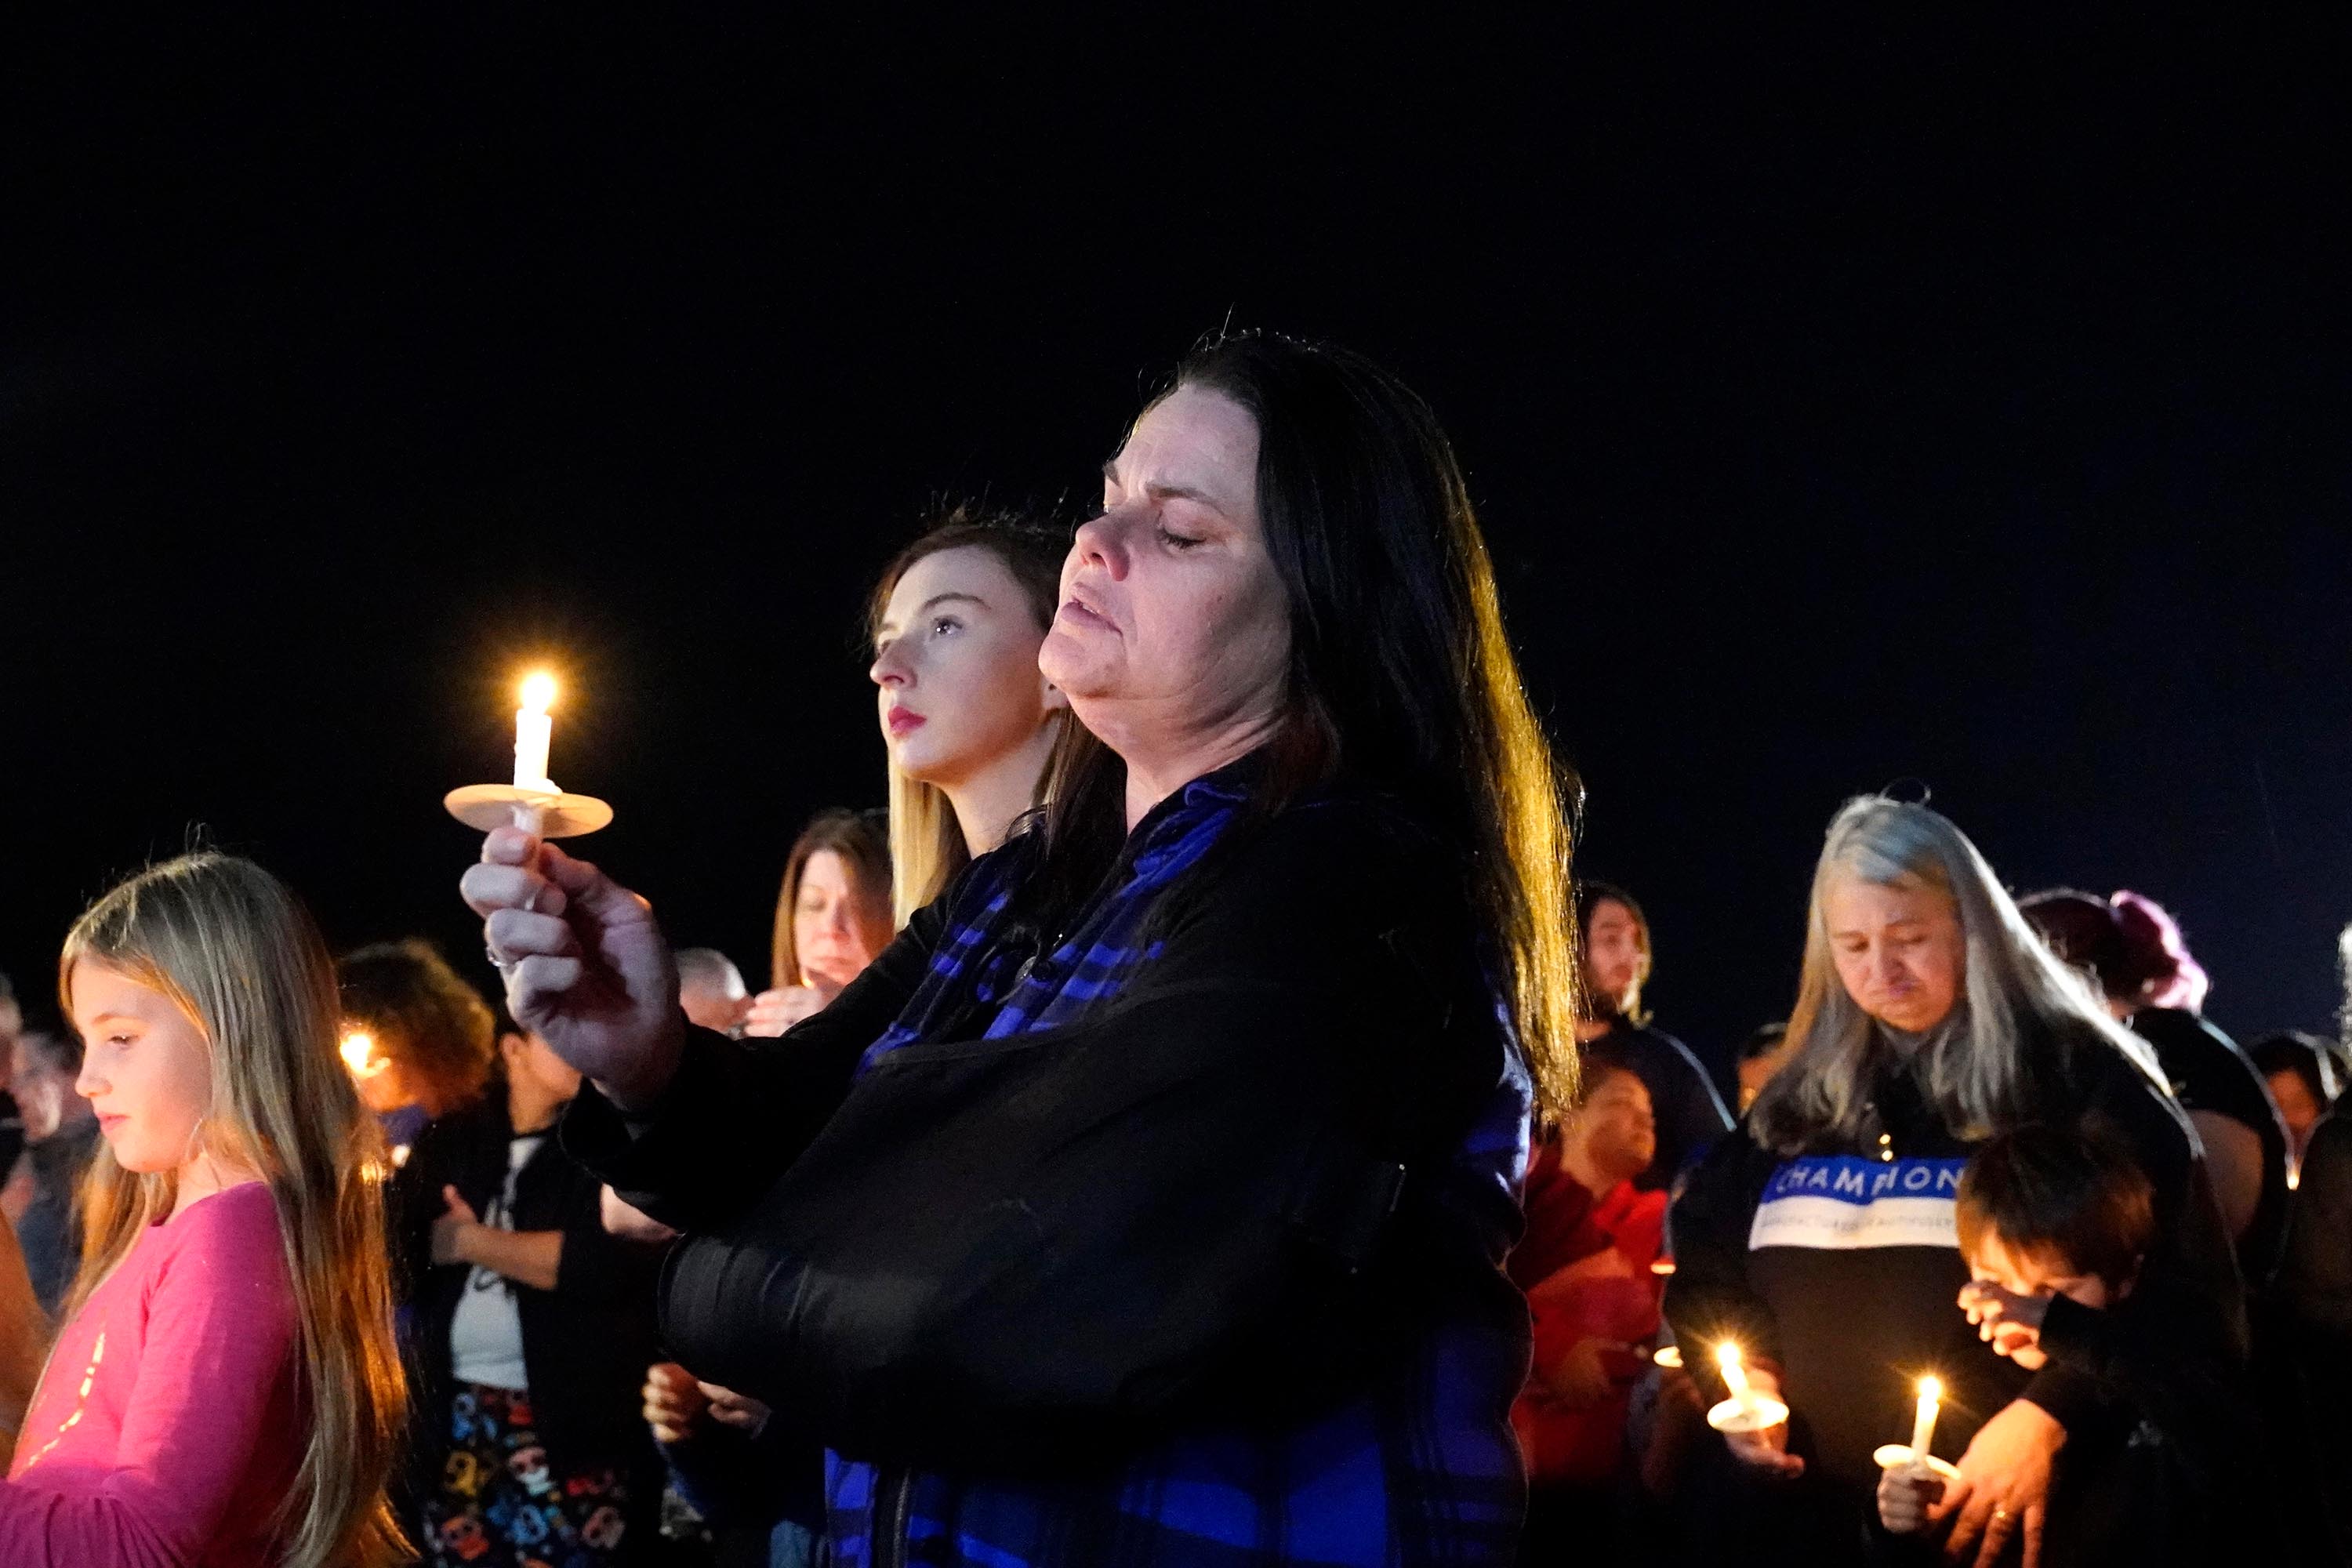 People participate in a candlelight vigil in the aftermath of tornadoes that tore through the region several days earlier, in Mayfield, Kentucky, late Tuesday, December 14.